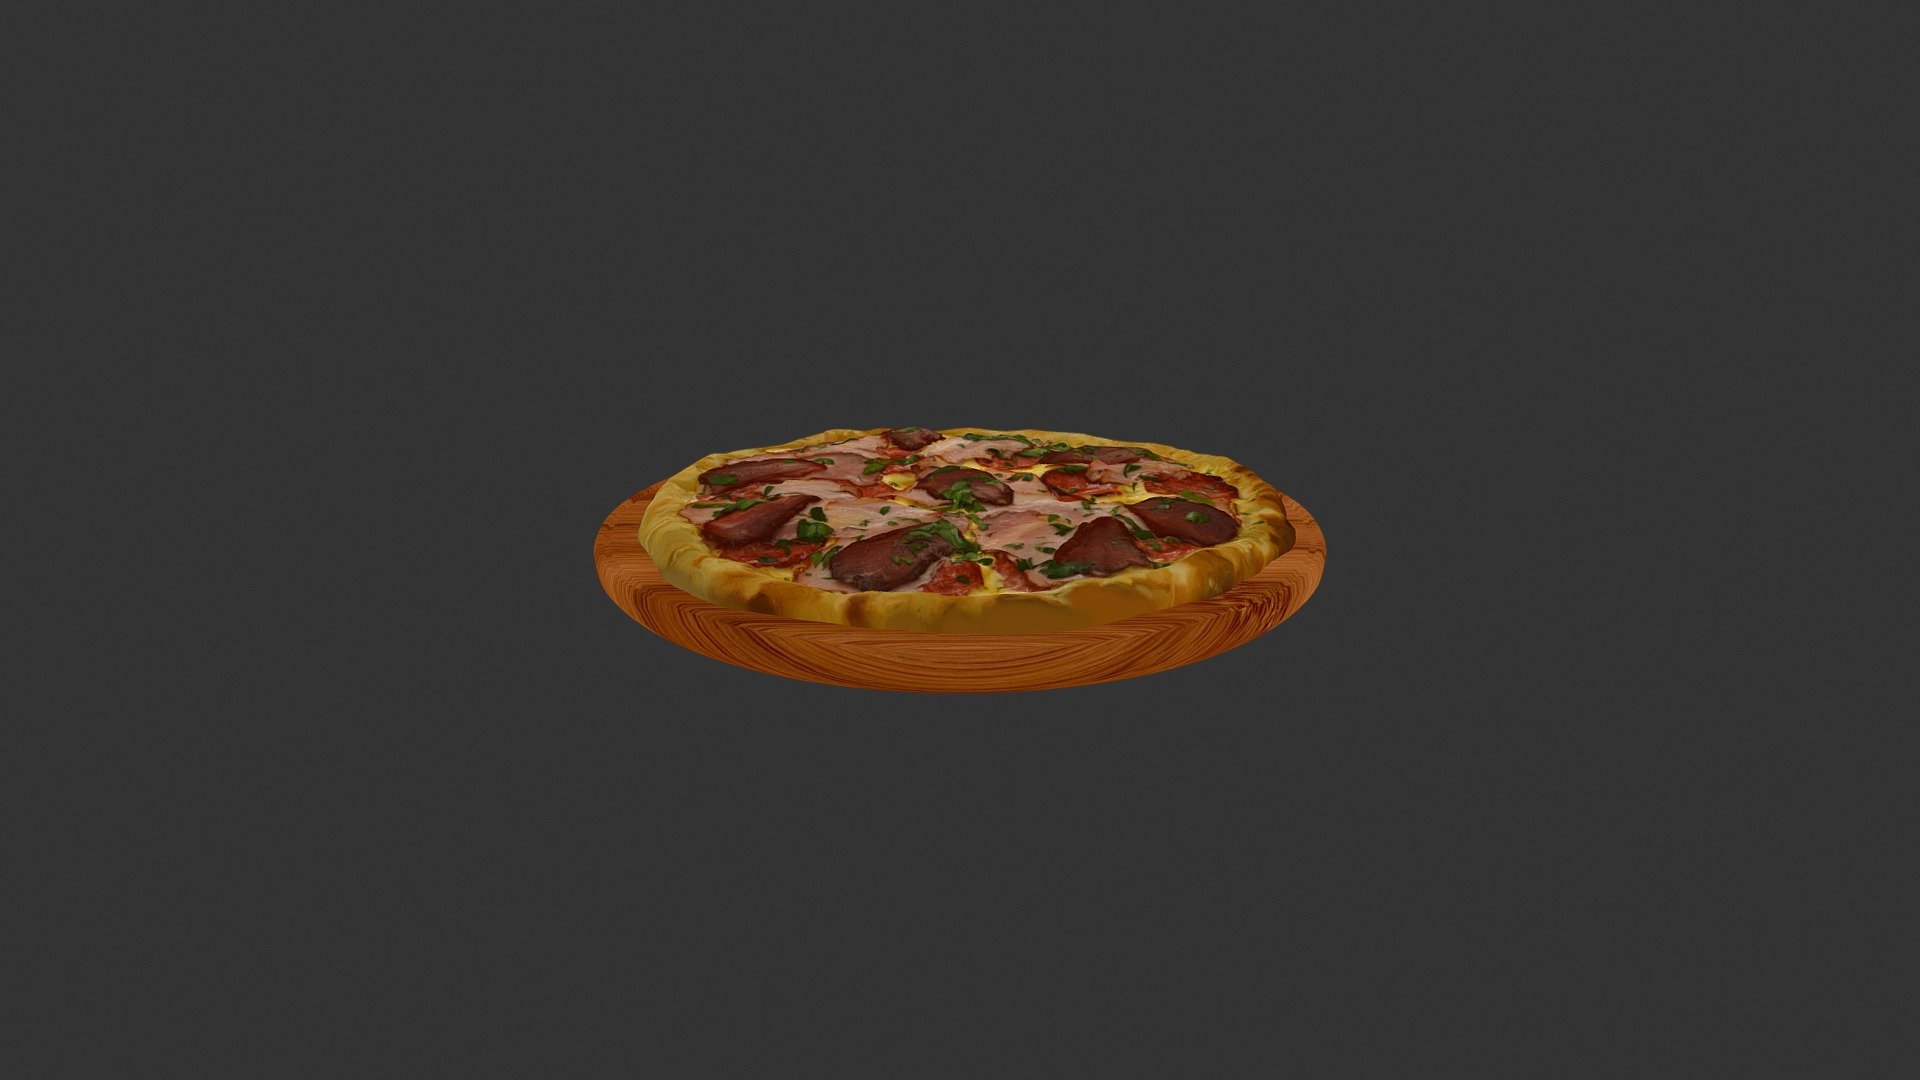 Піца Кватро ді Карне  (Meat_cheese_pizza) - 3D model by alex.alexandrov.a 3d model